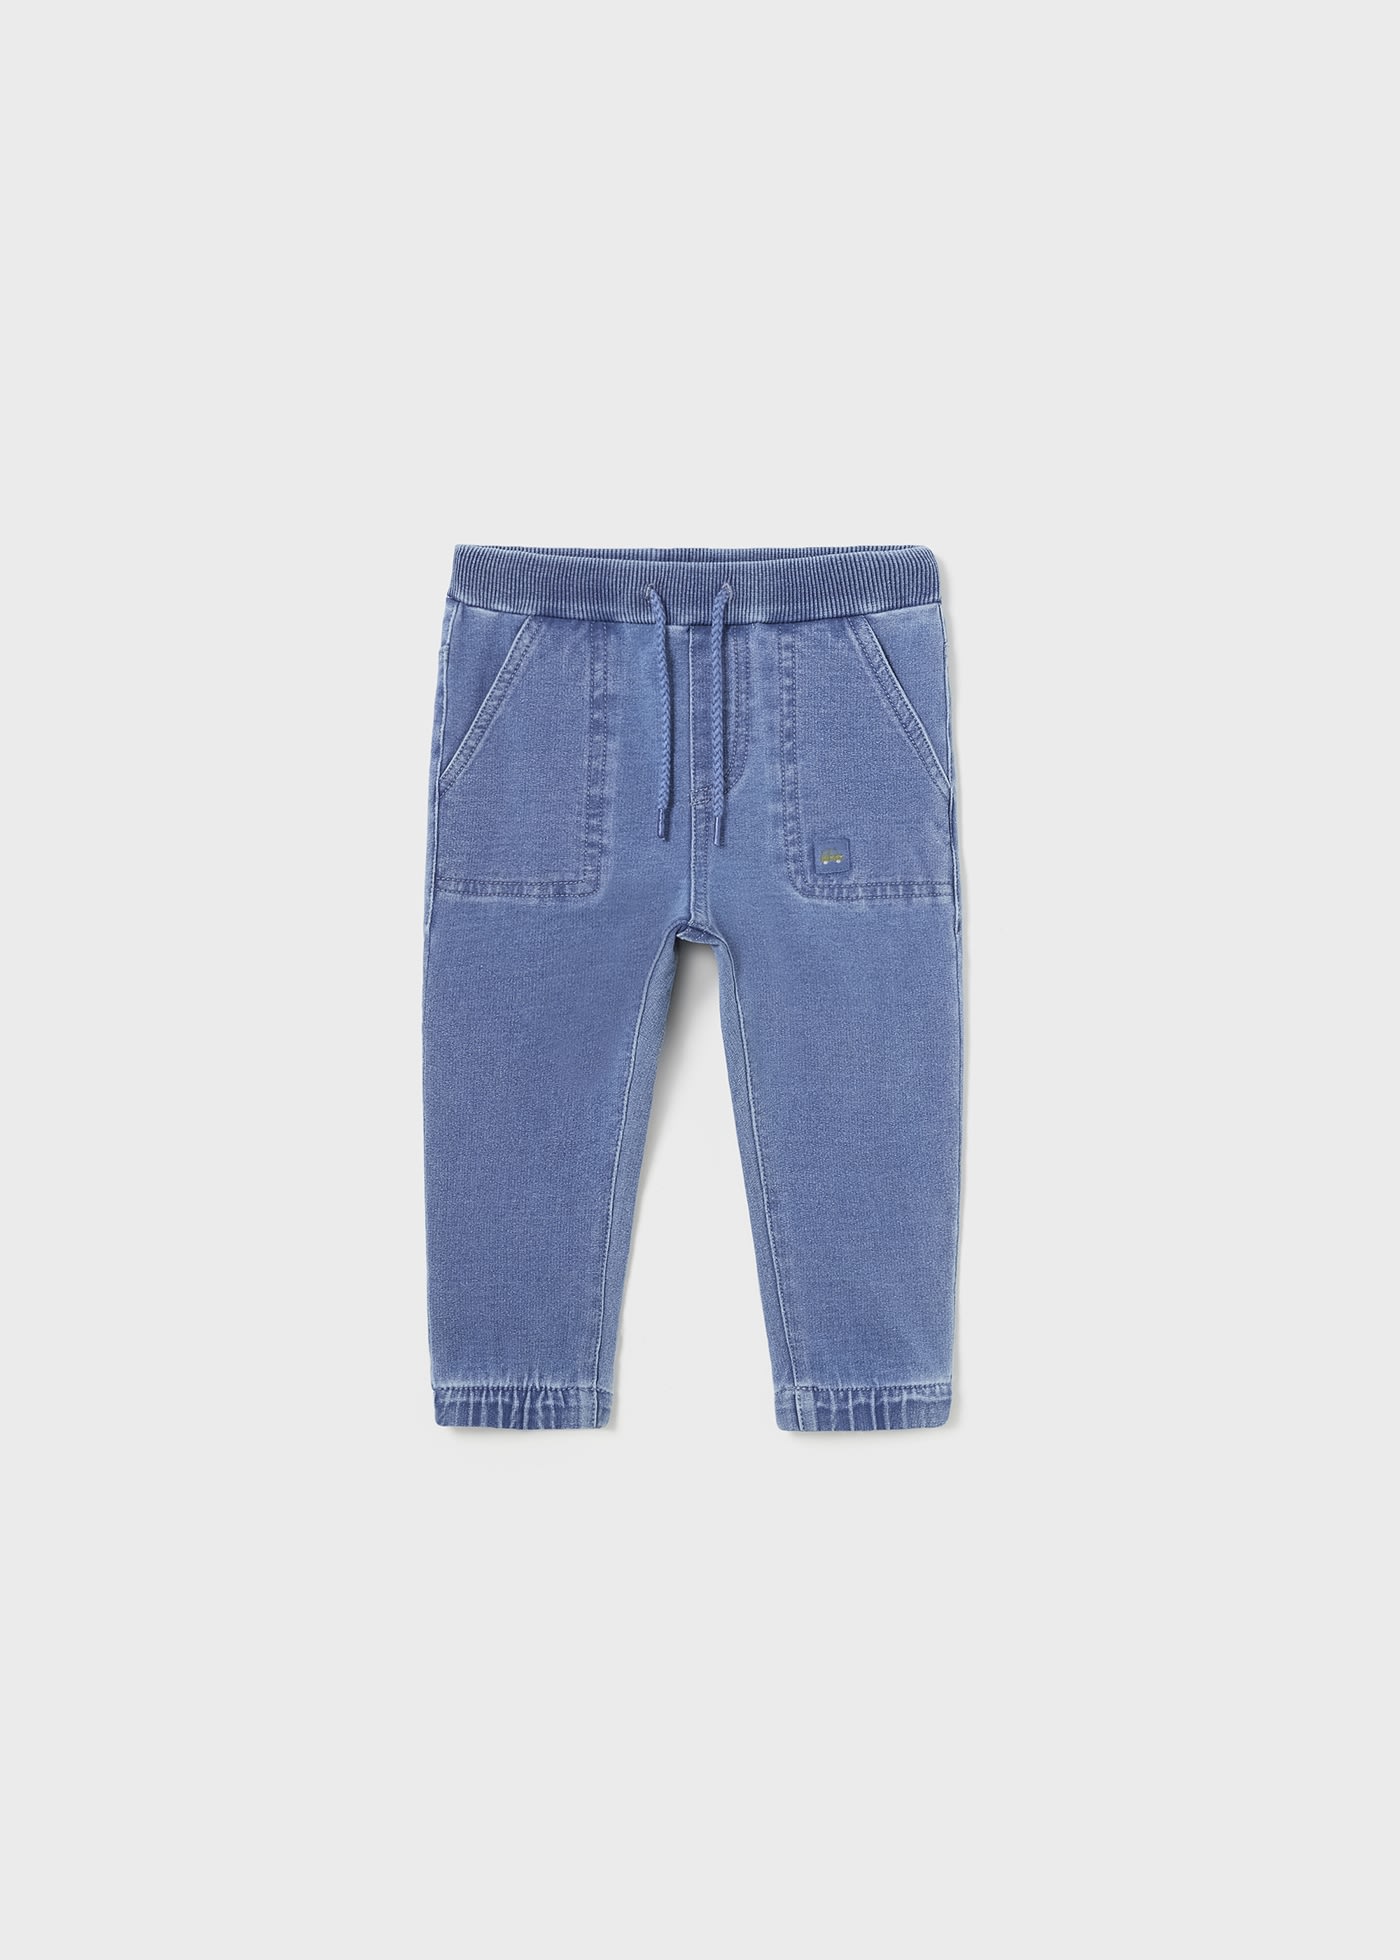 Ketyyh-chn99 Baby Boys Jeans Baby Boys Denim Jeans Flare Pants Ripped  Trousers Light Blue,73 - Walmart.com